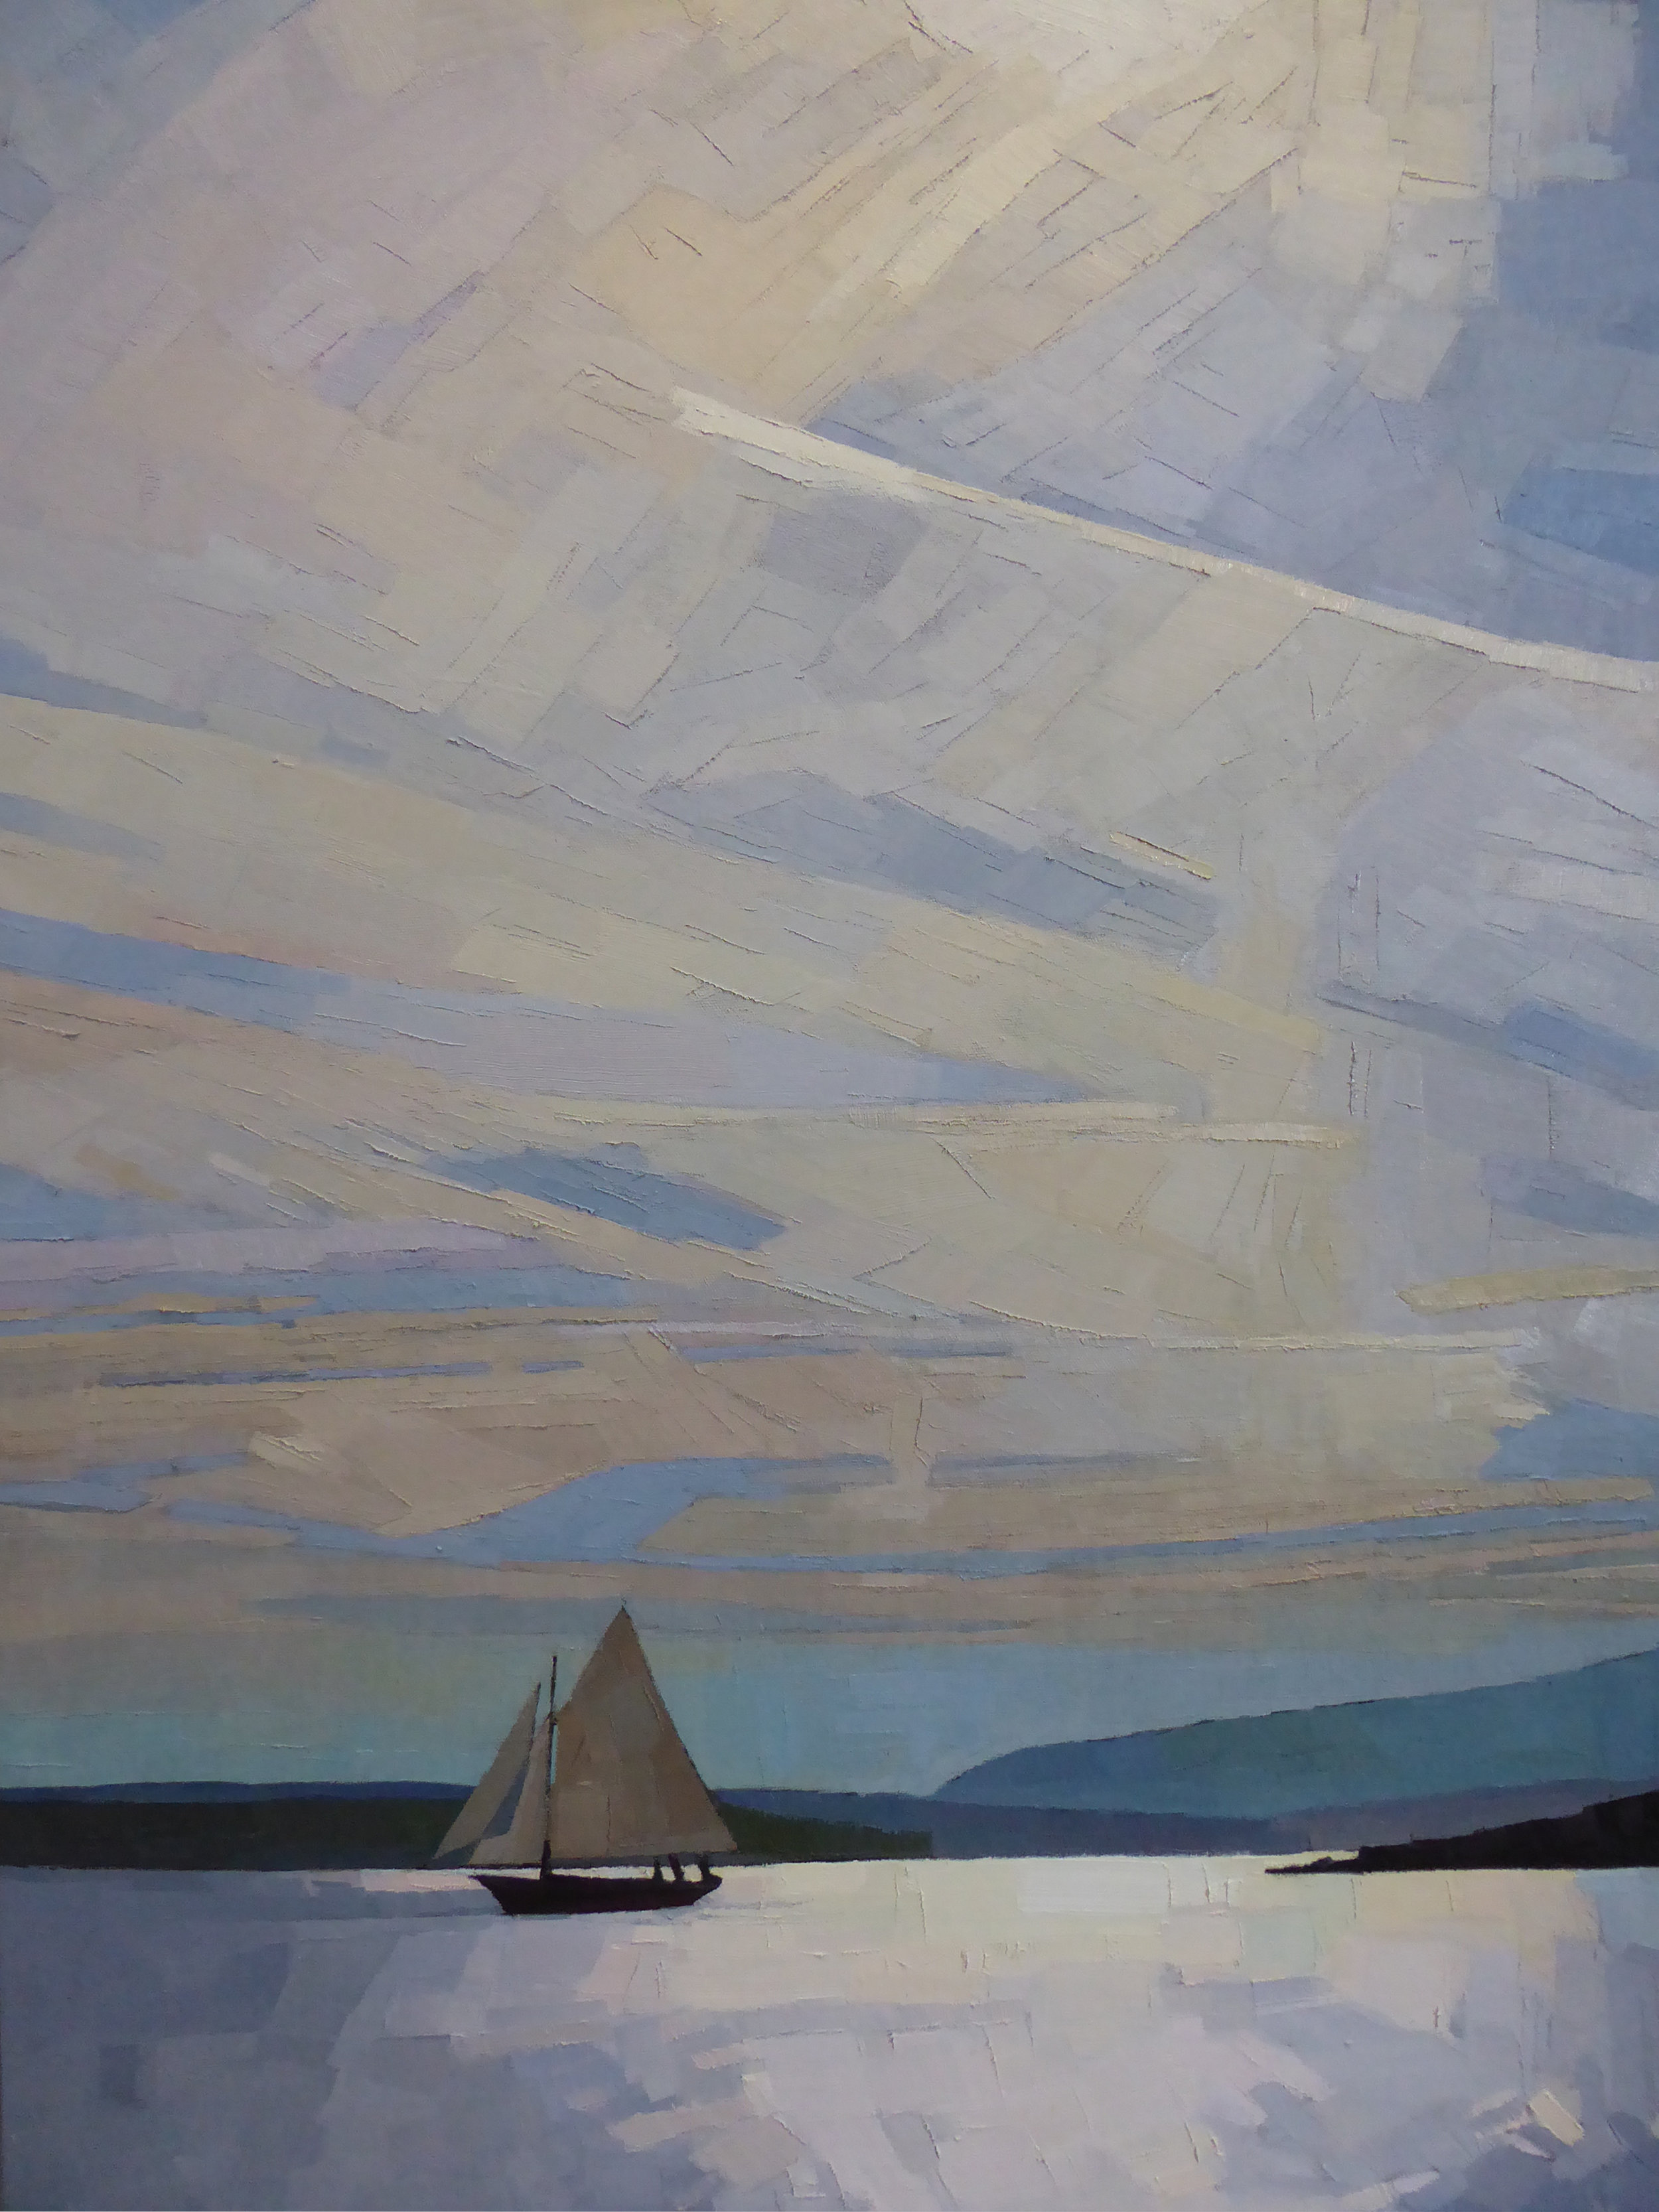   Sloop in the Sun  30 x 40 oil on linen  Commission/Sold   